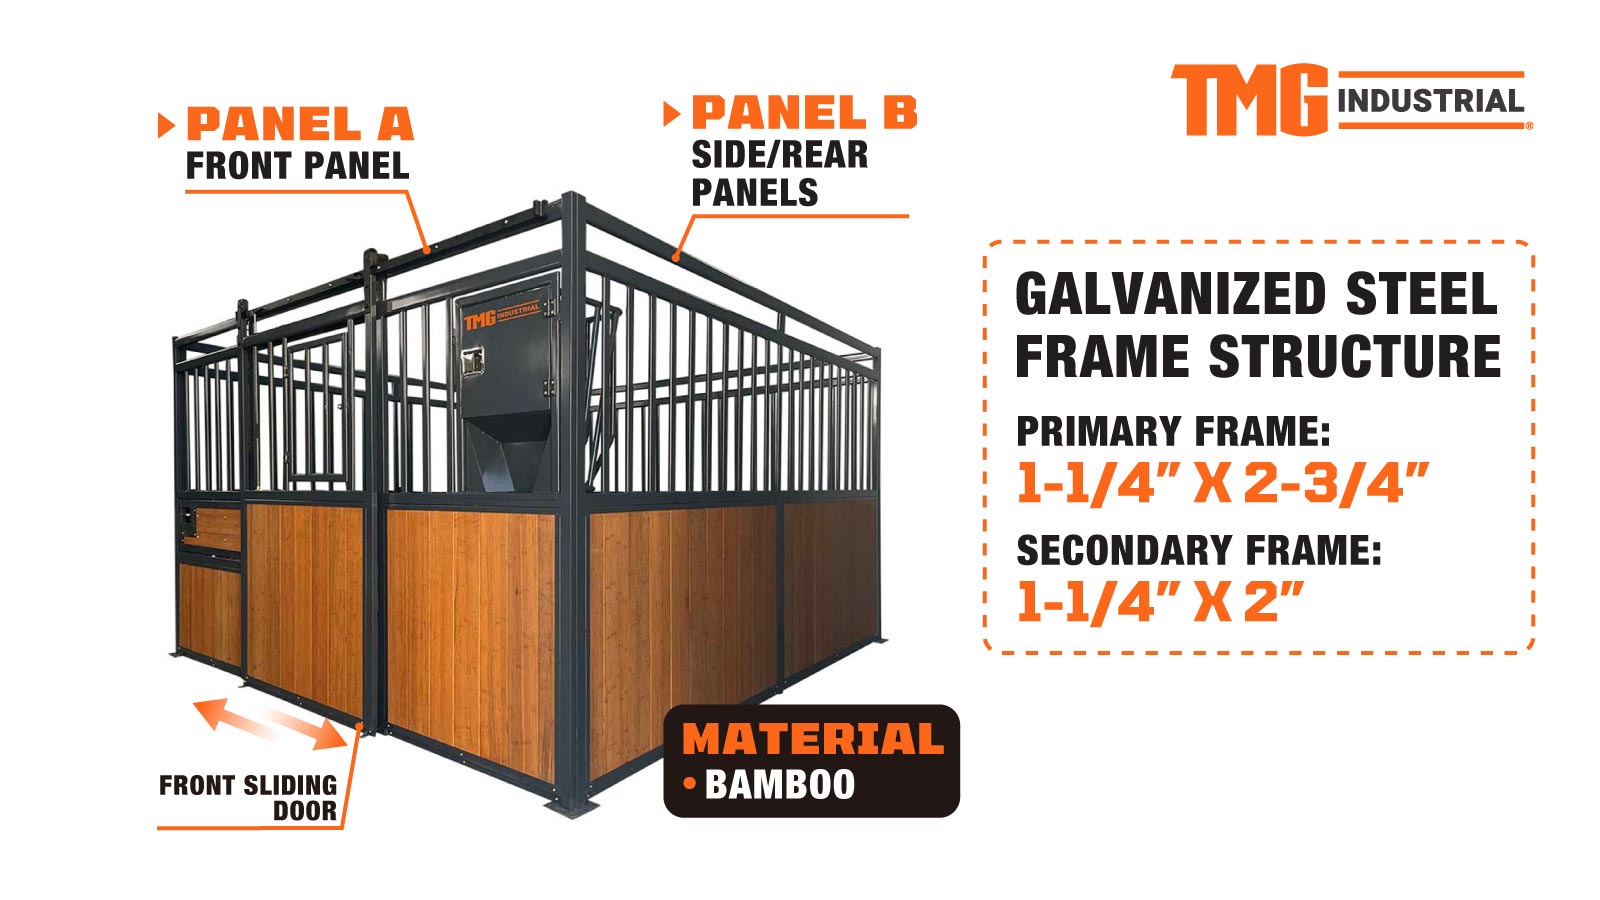 TMG Industrial 12’ Horse Stall Bamboo Panel, Vertical Bar Top, Front panel c/w Window/Feeder and Sliding Door, TMG-FHS13A and FHS13B-description-image